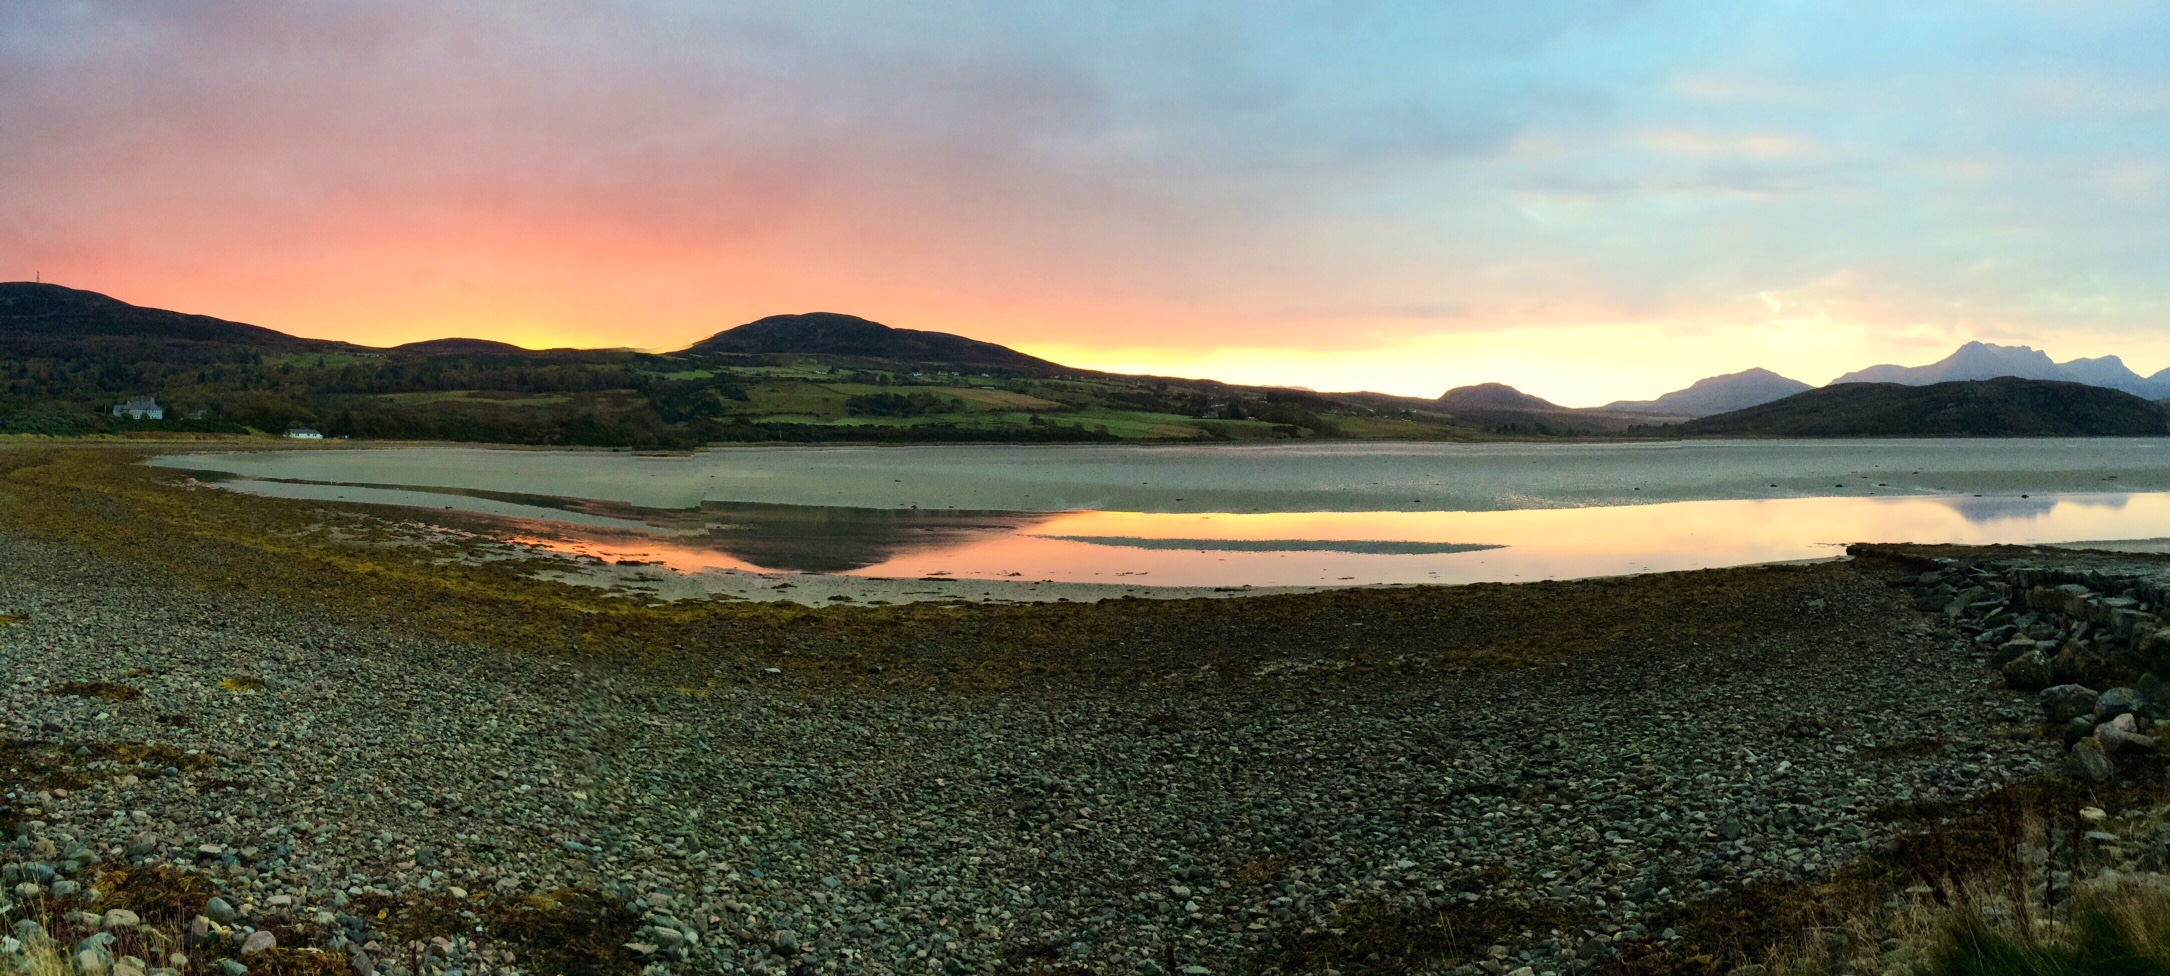 Sunrise over the Kyle of Tongue